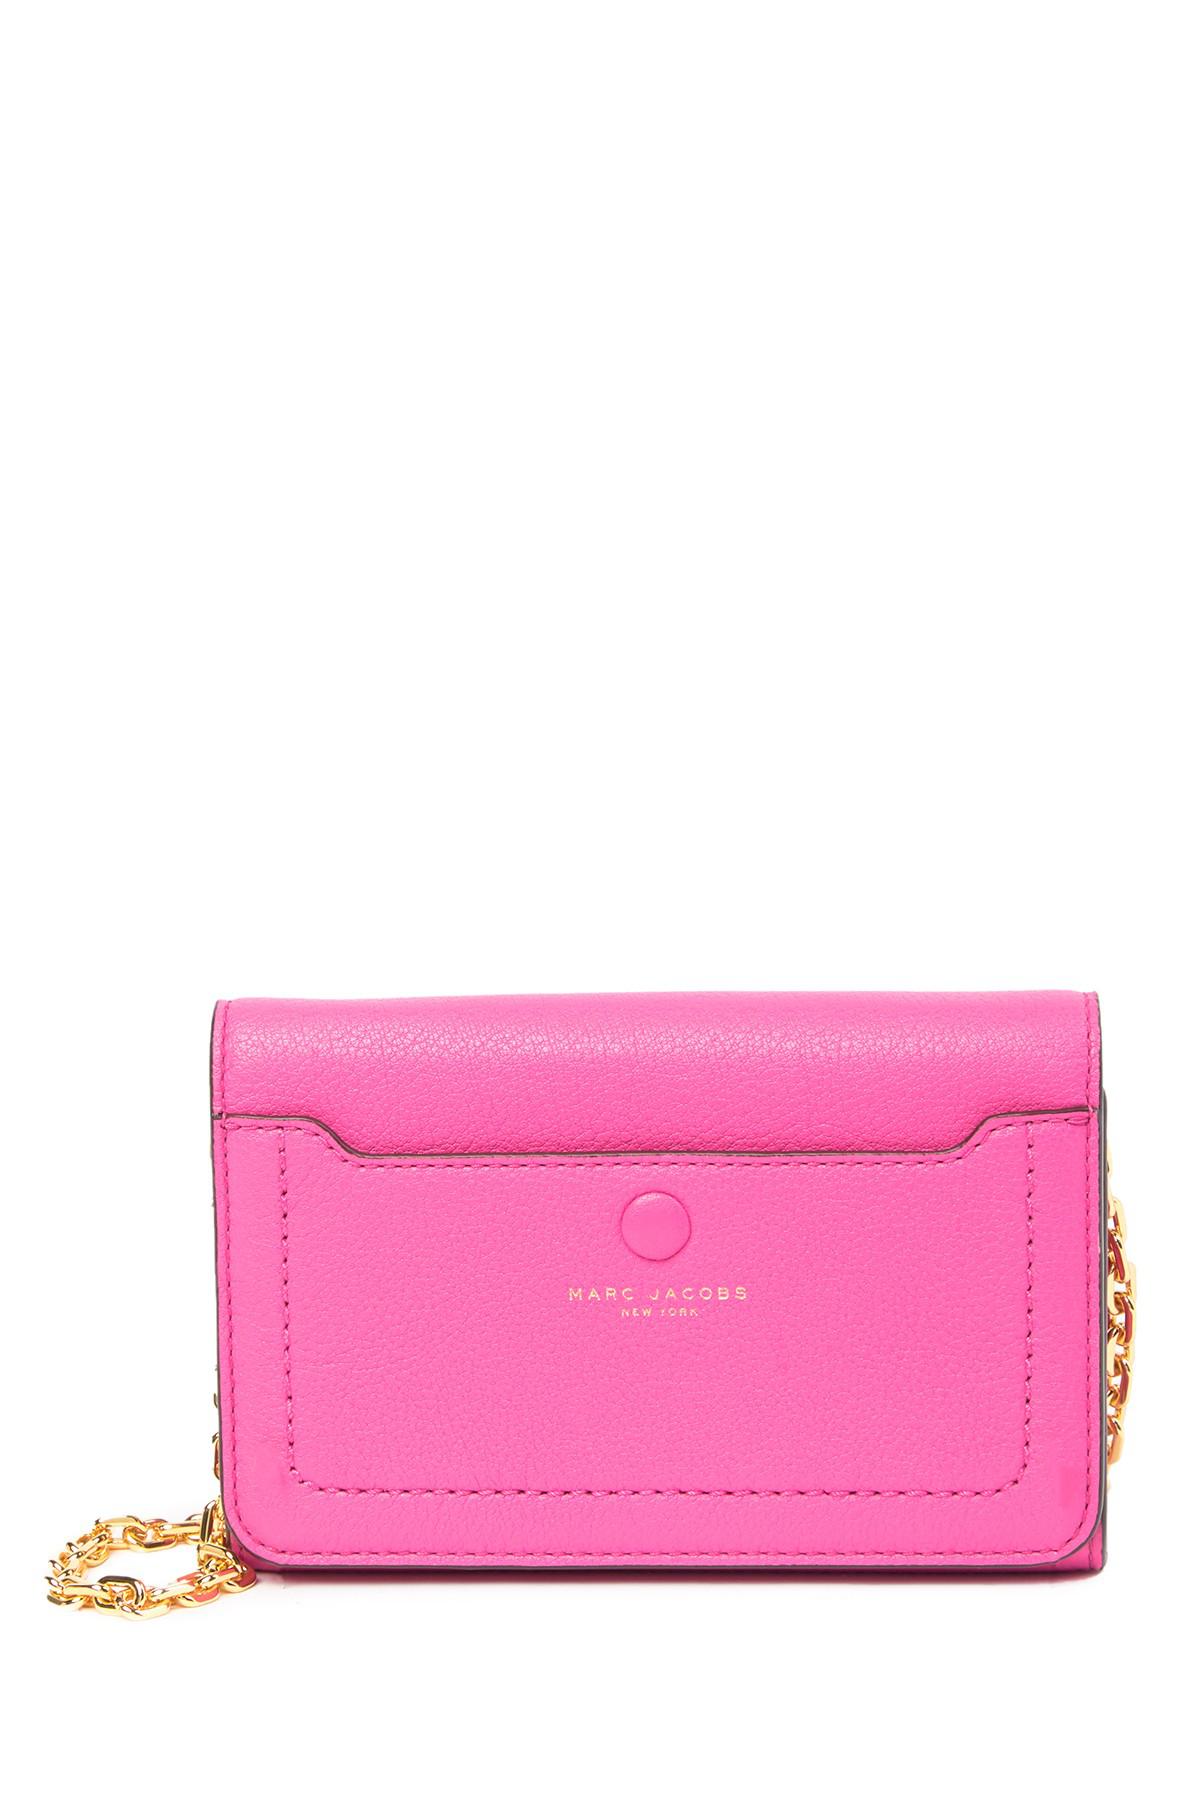 Marc Jacobs Empire City Leather Wallet Crossbody Bag in Pink - Lyst